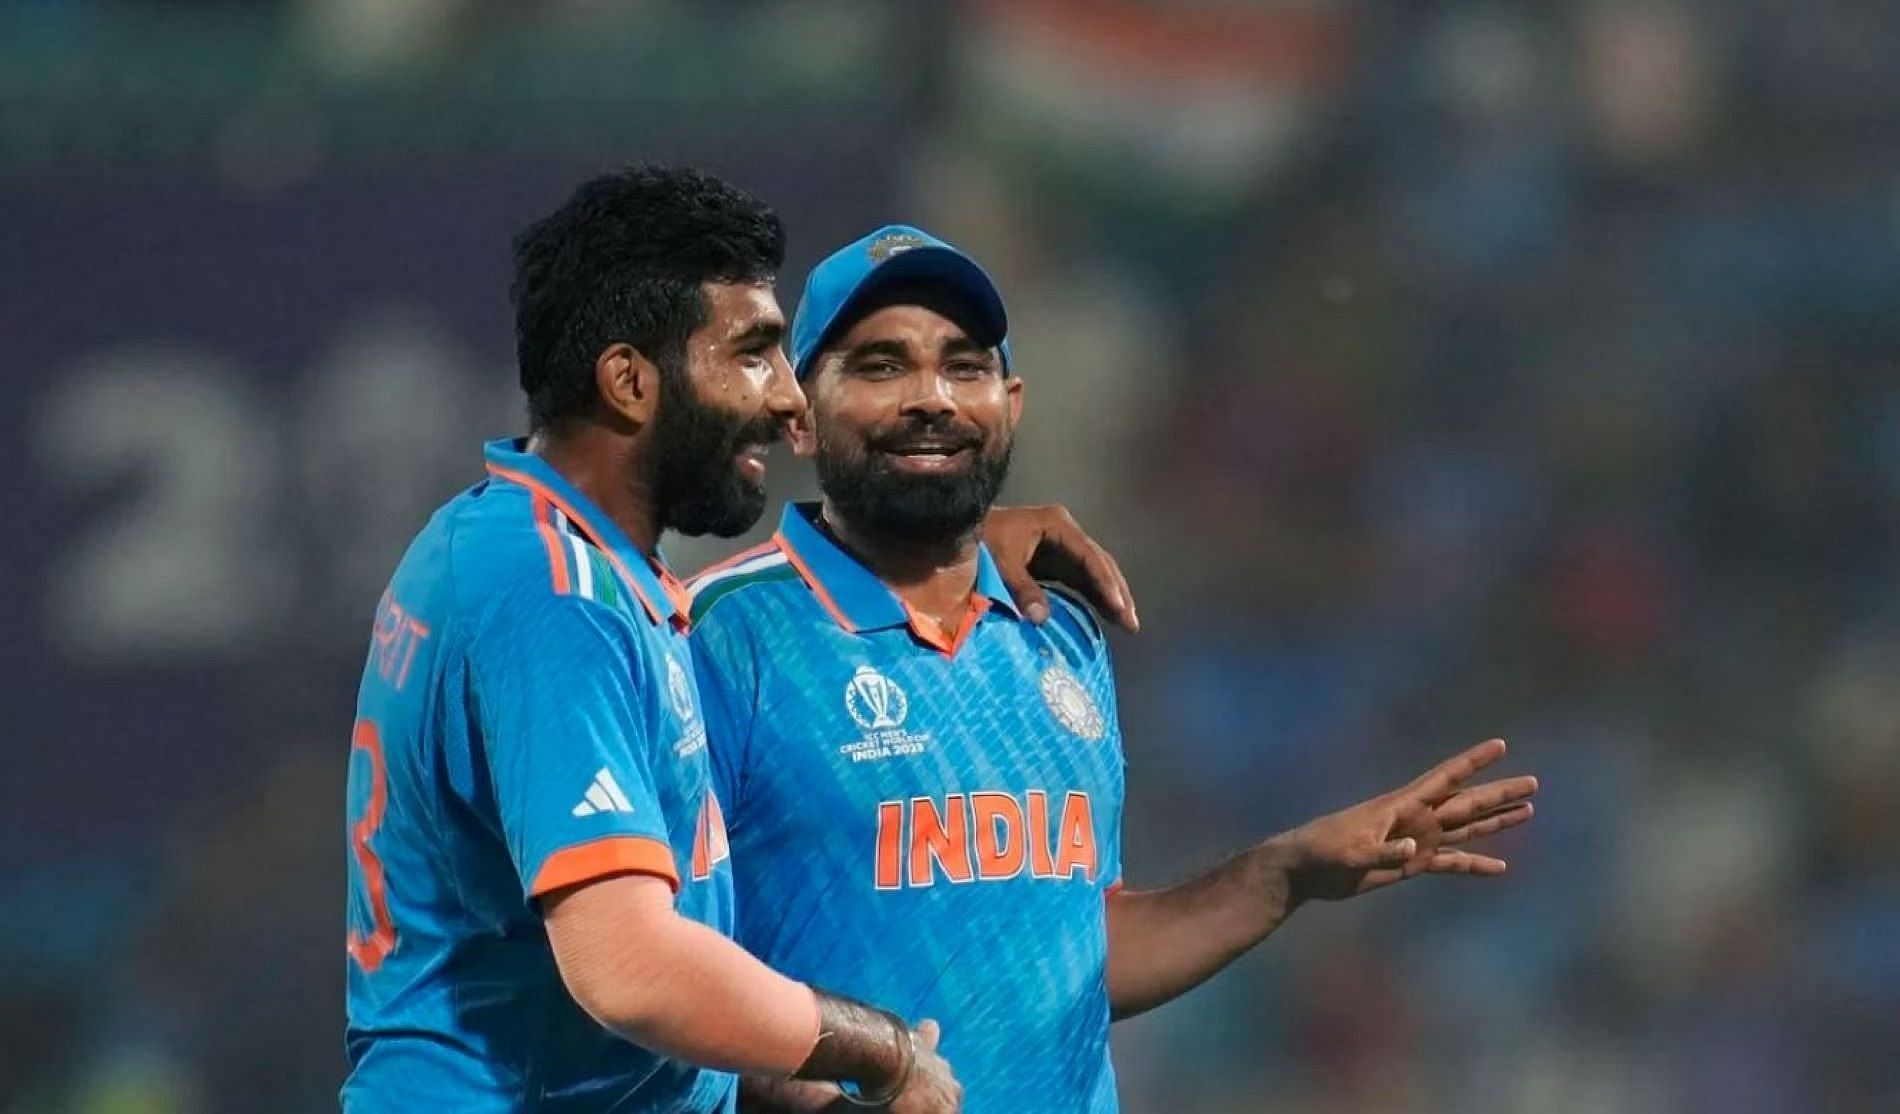 Mohammed Shami (right) and Jasprit Bumrah are India